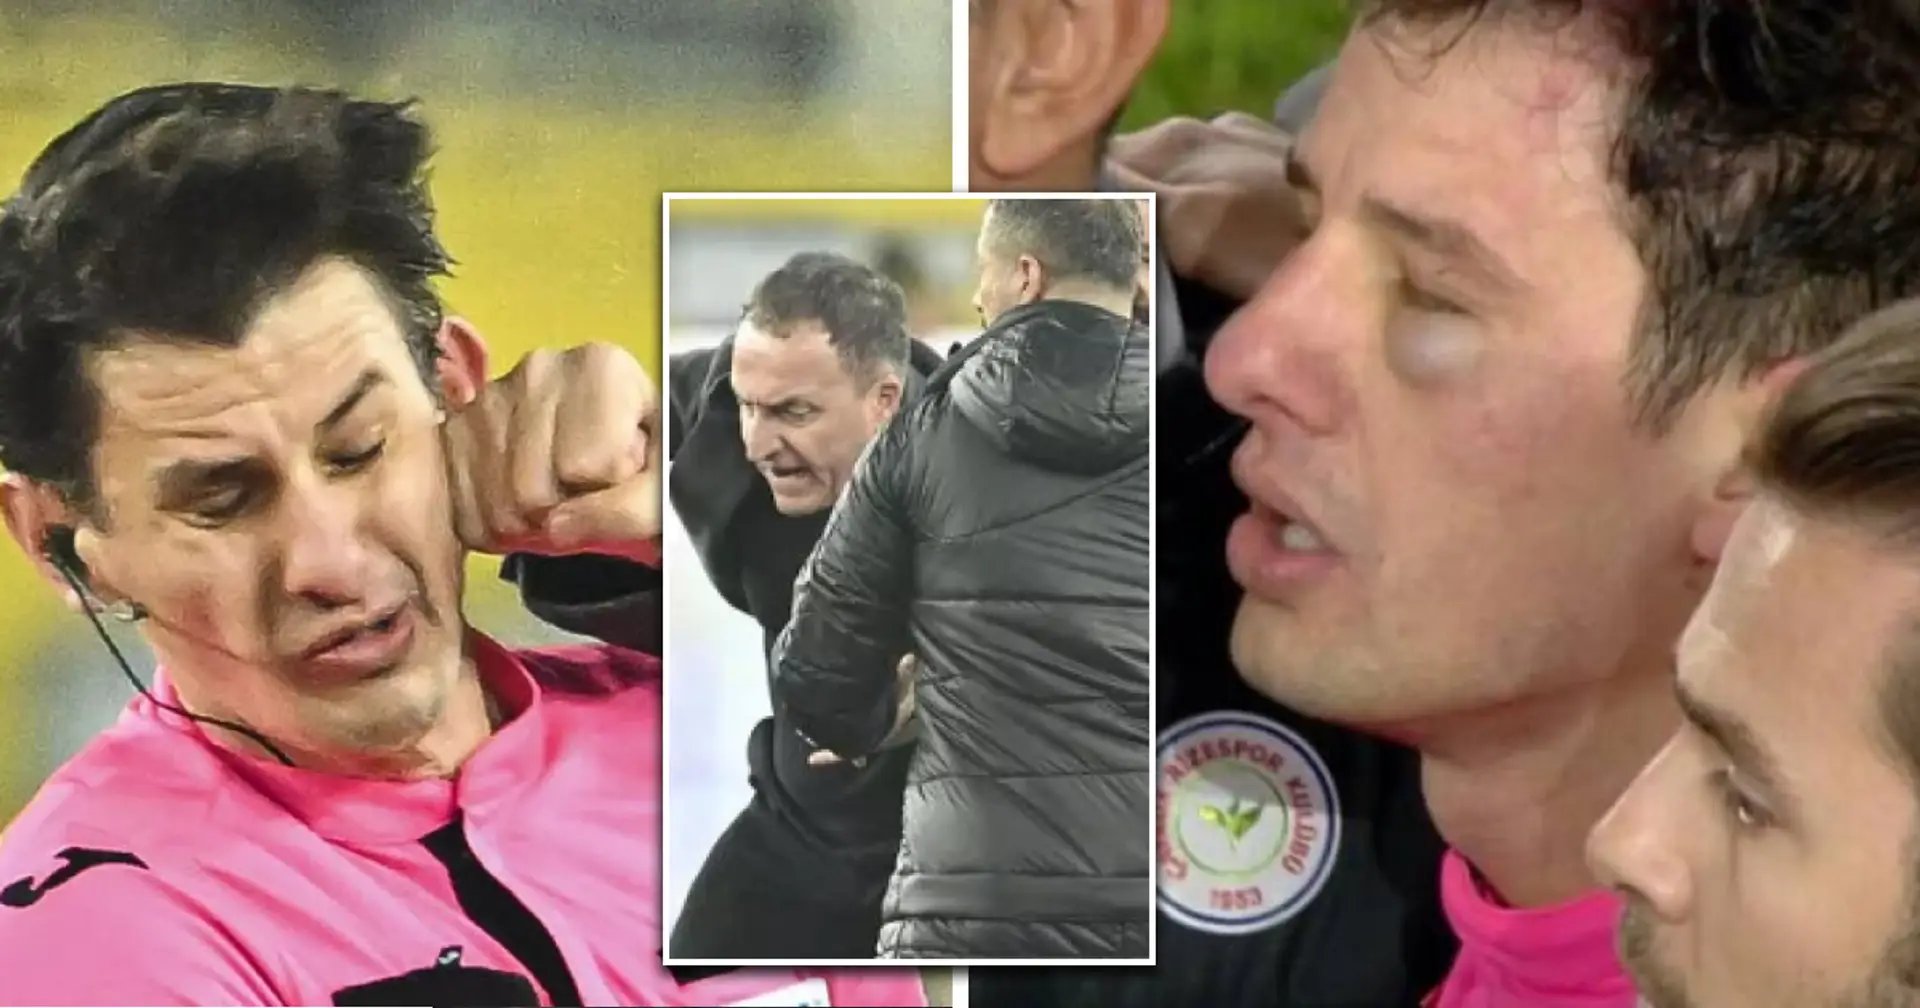 'To prevent any further harm': Turkish club chairman resigns after hospitalising referee in on-pitch attack